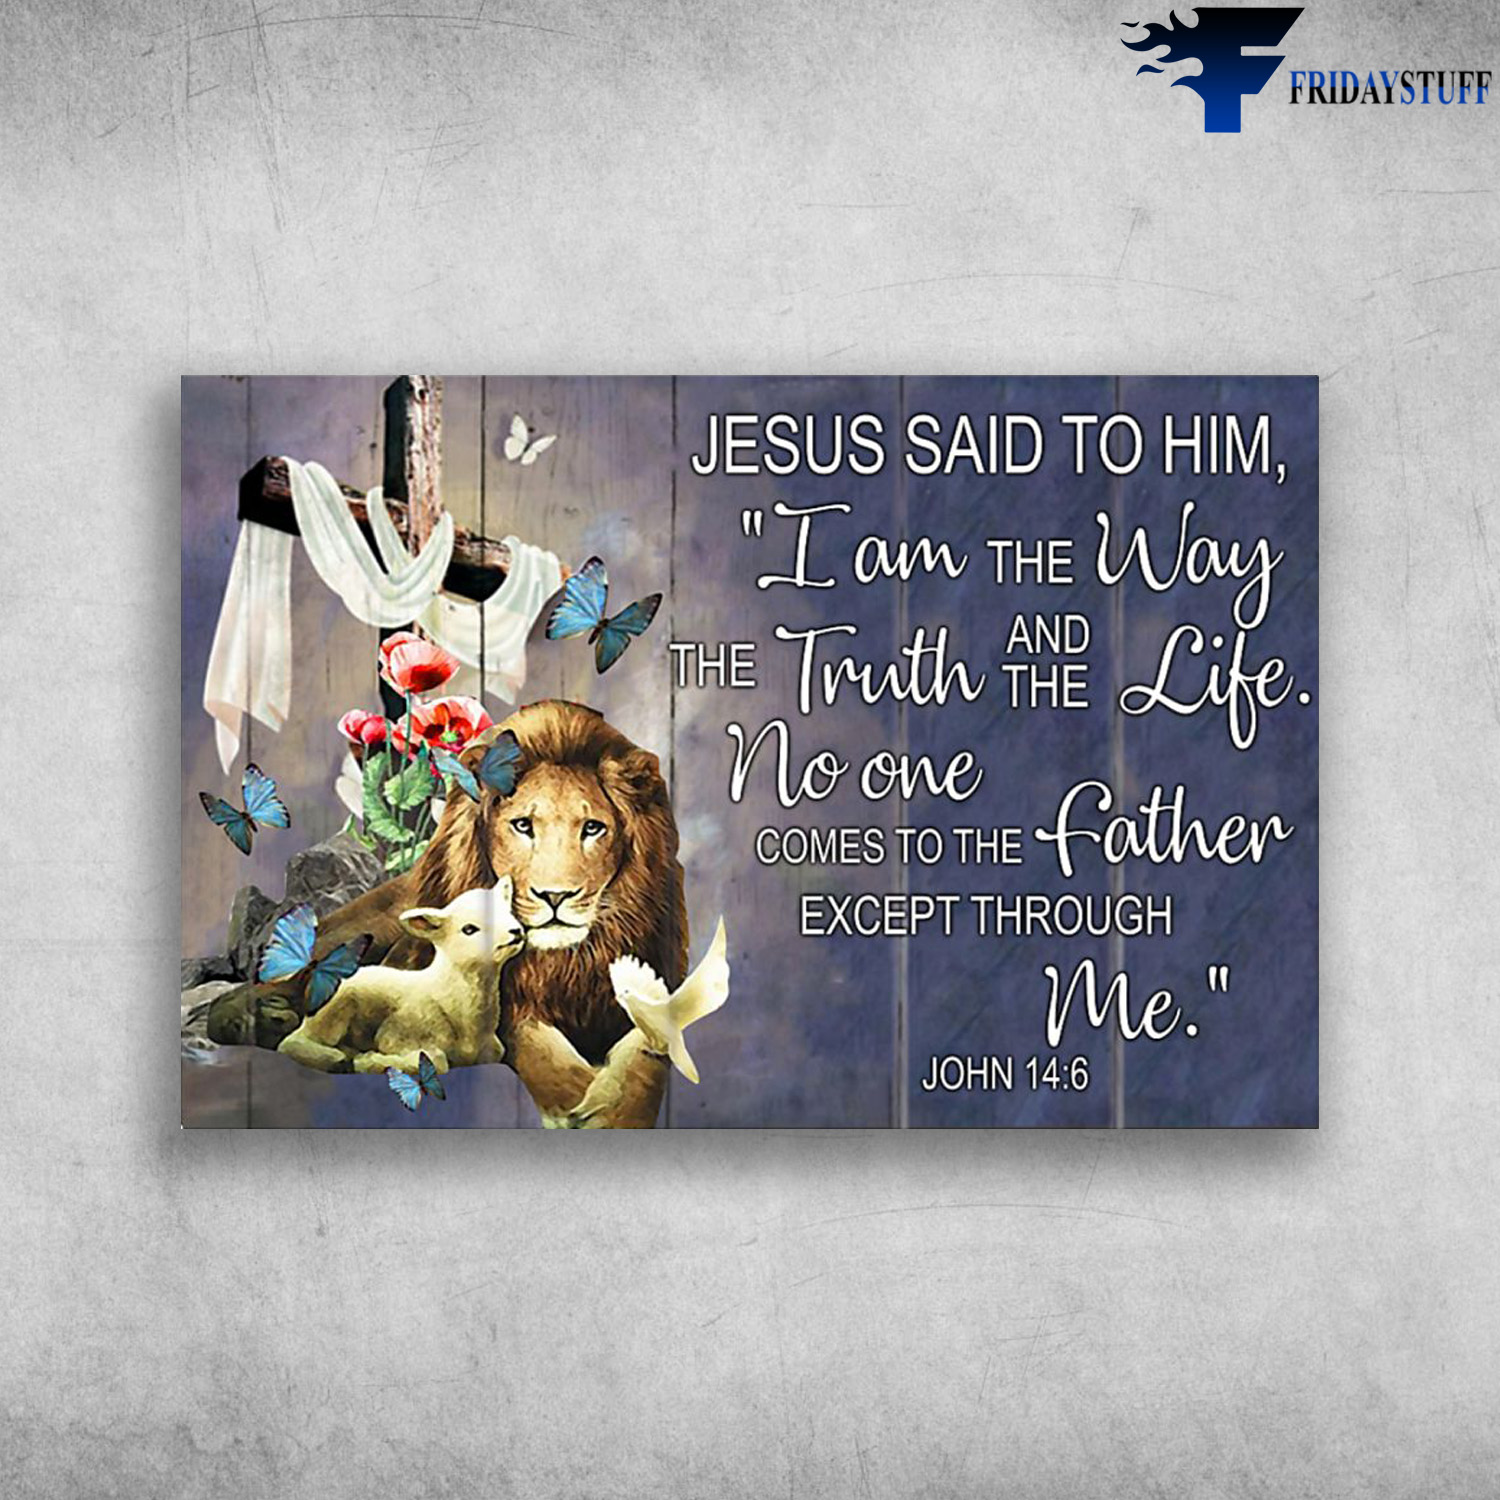 The Cross, Lion, Goat And Butterfly - Jesus Said To Him, I Am The Way, The Truth And The Life, No One Comes To The Father Except Through Me